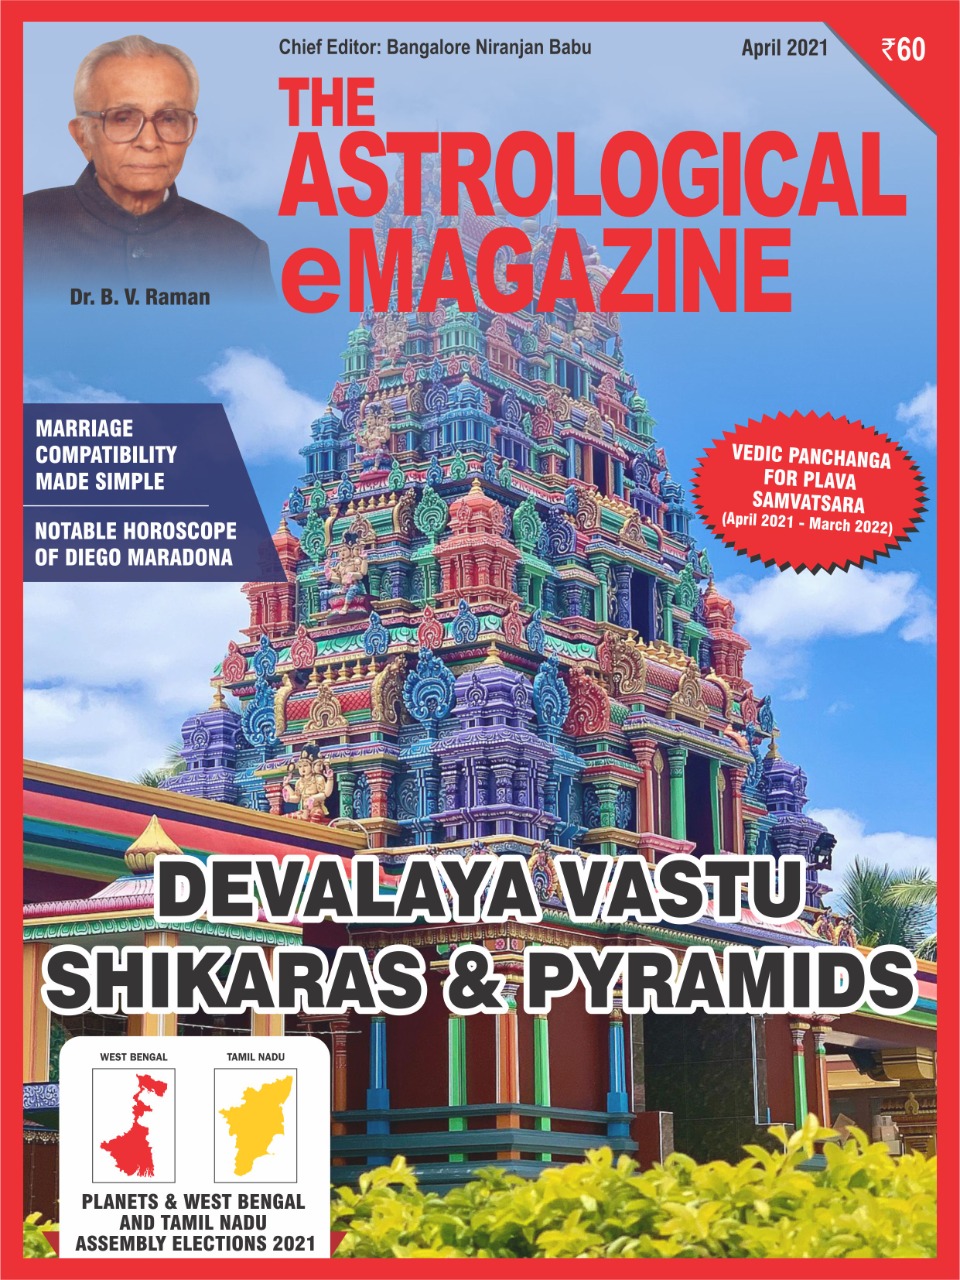 April 2021 issue of The Astrological eMagazine